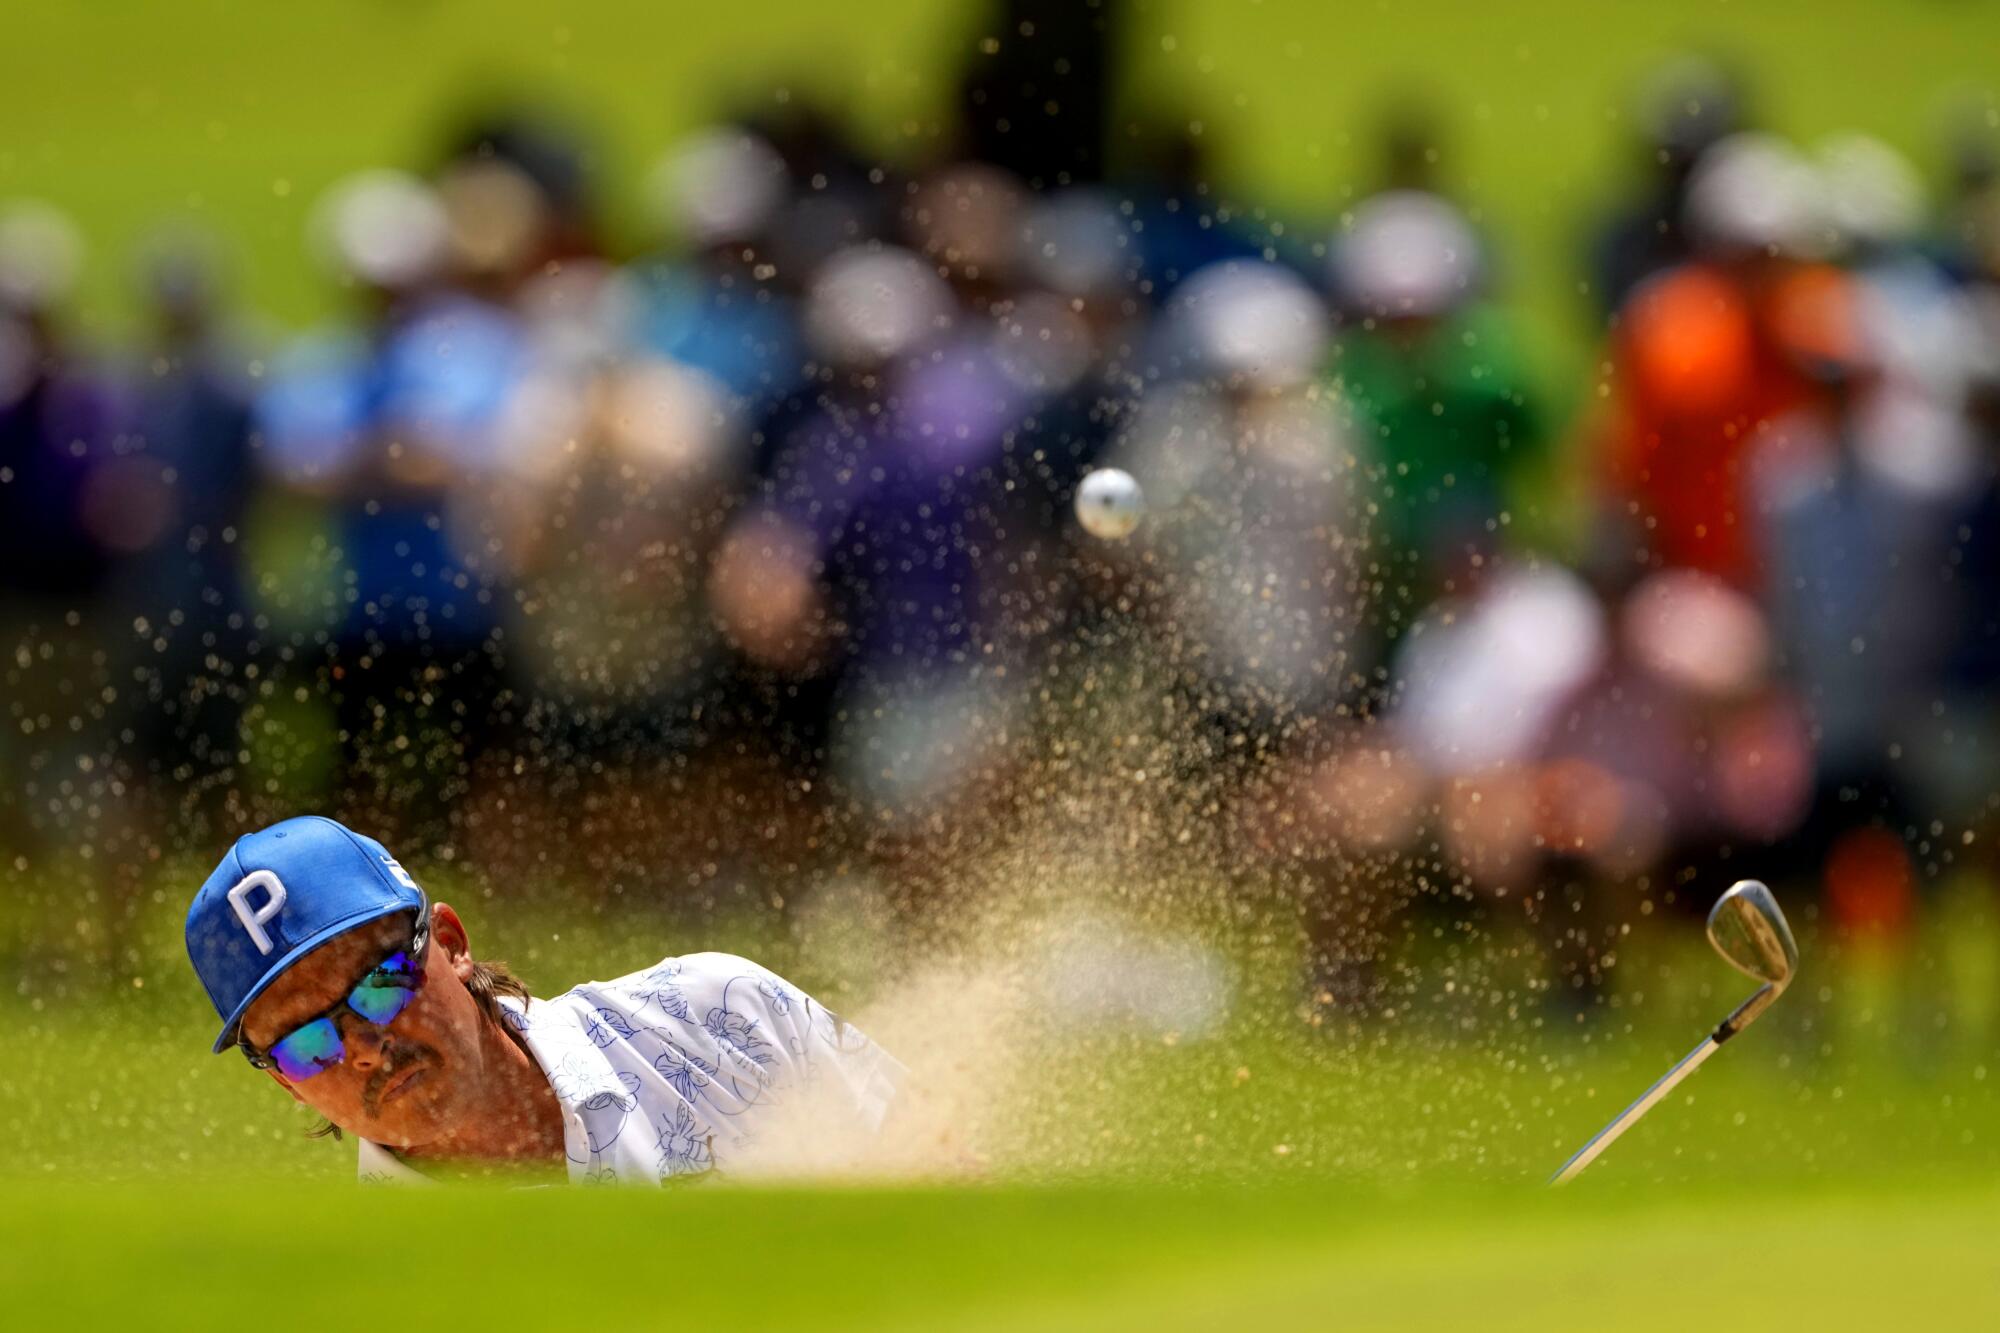 Rickie Fowler hits from the bunker on the first hole during the first round of the PGA Championship at Southern Hills.